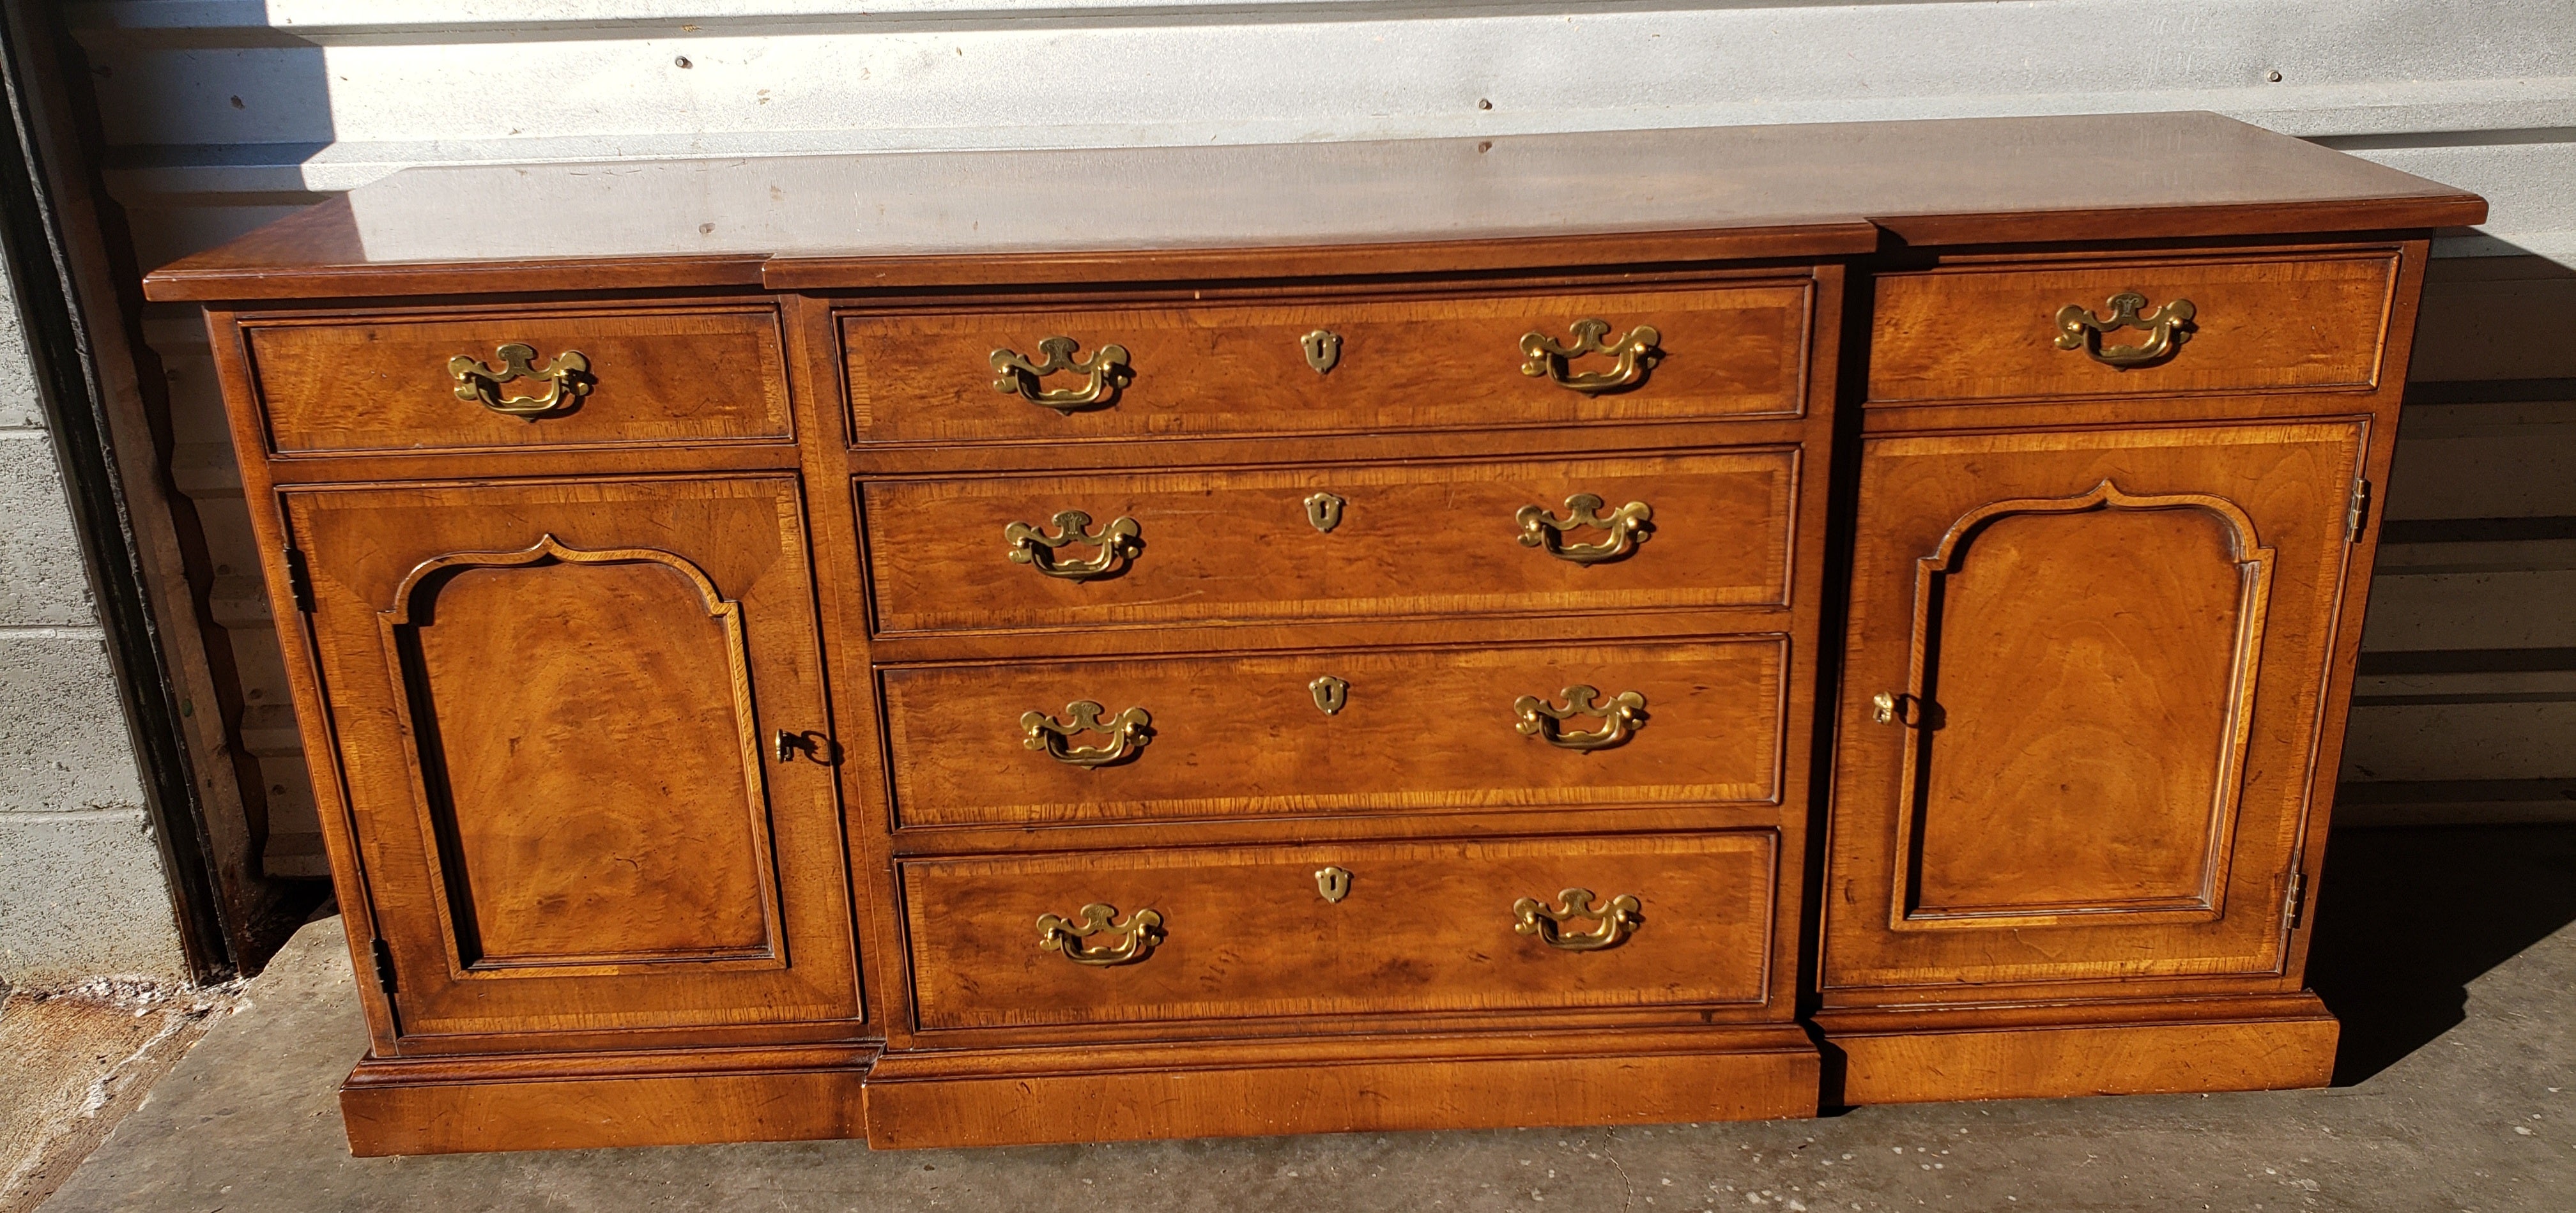 Henredon's 18th Century Portfolio Banded Burl Walnut Credenza Buffet In Good Condition For Sale In Germantown, MD